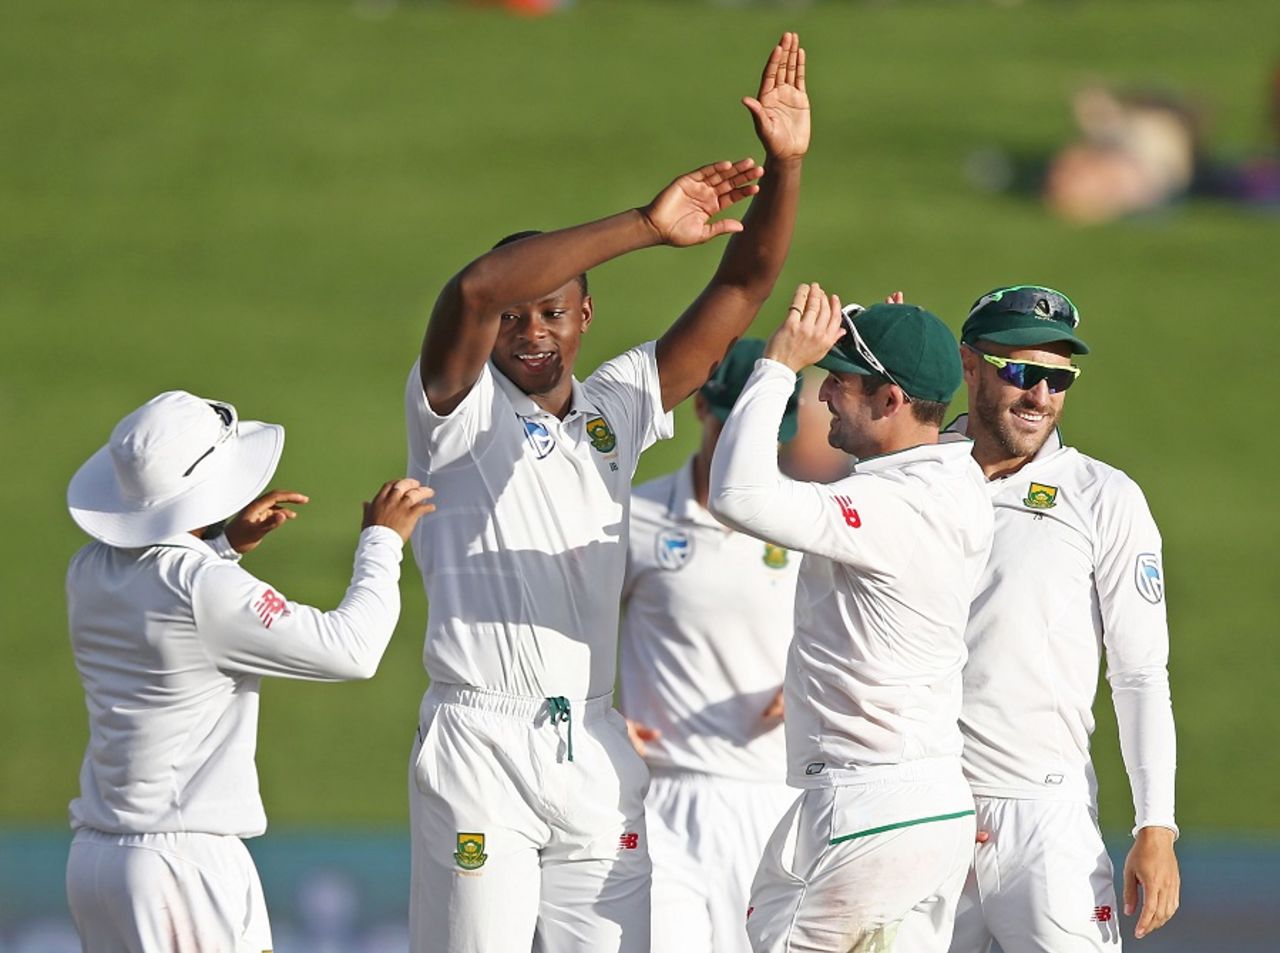 Kagiso Rabada provided South Africa with late respite, New Zealand v South Africa, 3rd Test, Hamilton, 3rd day, March 27, 2017